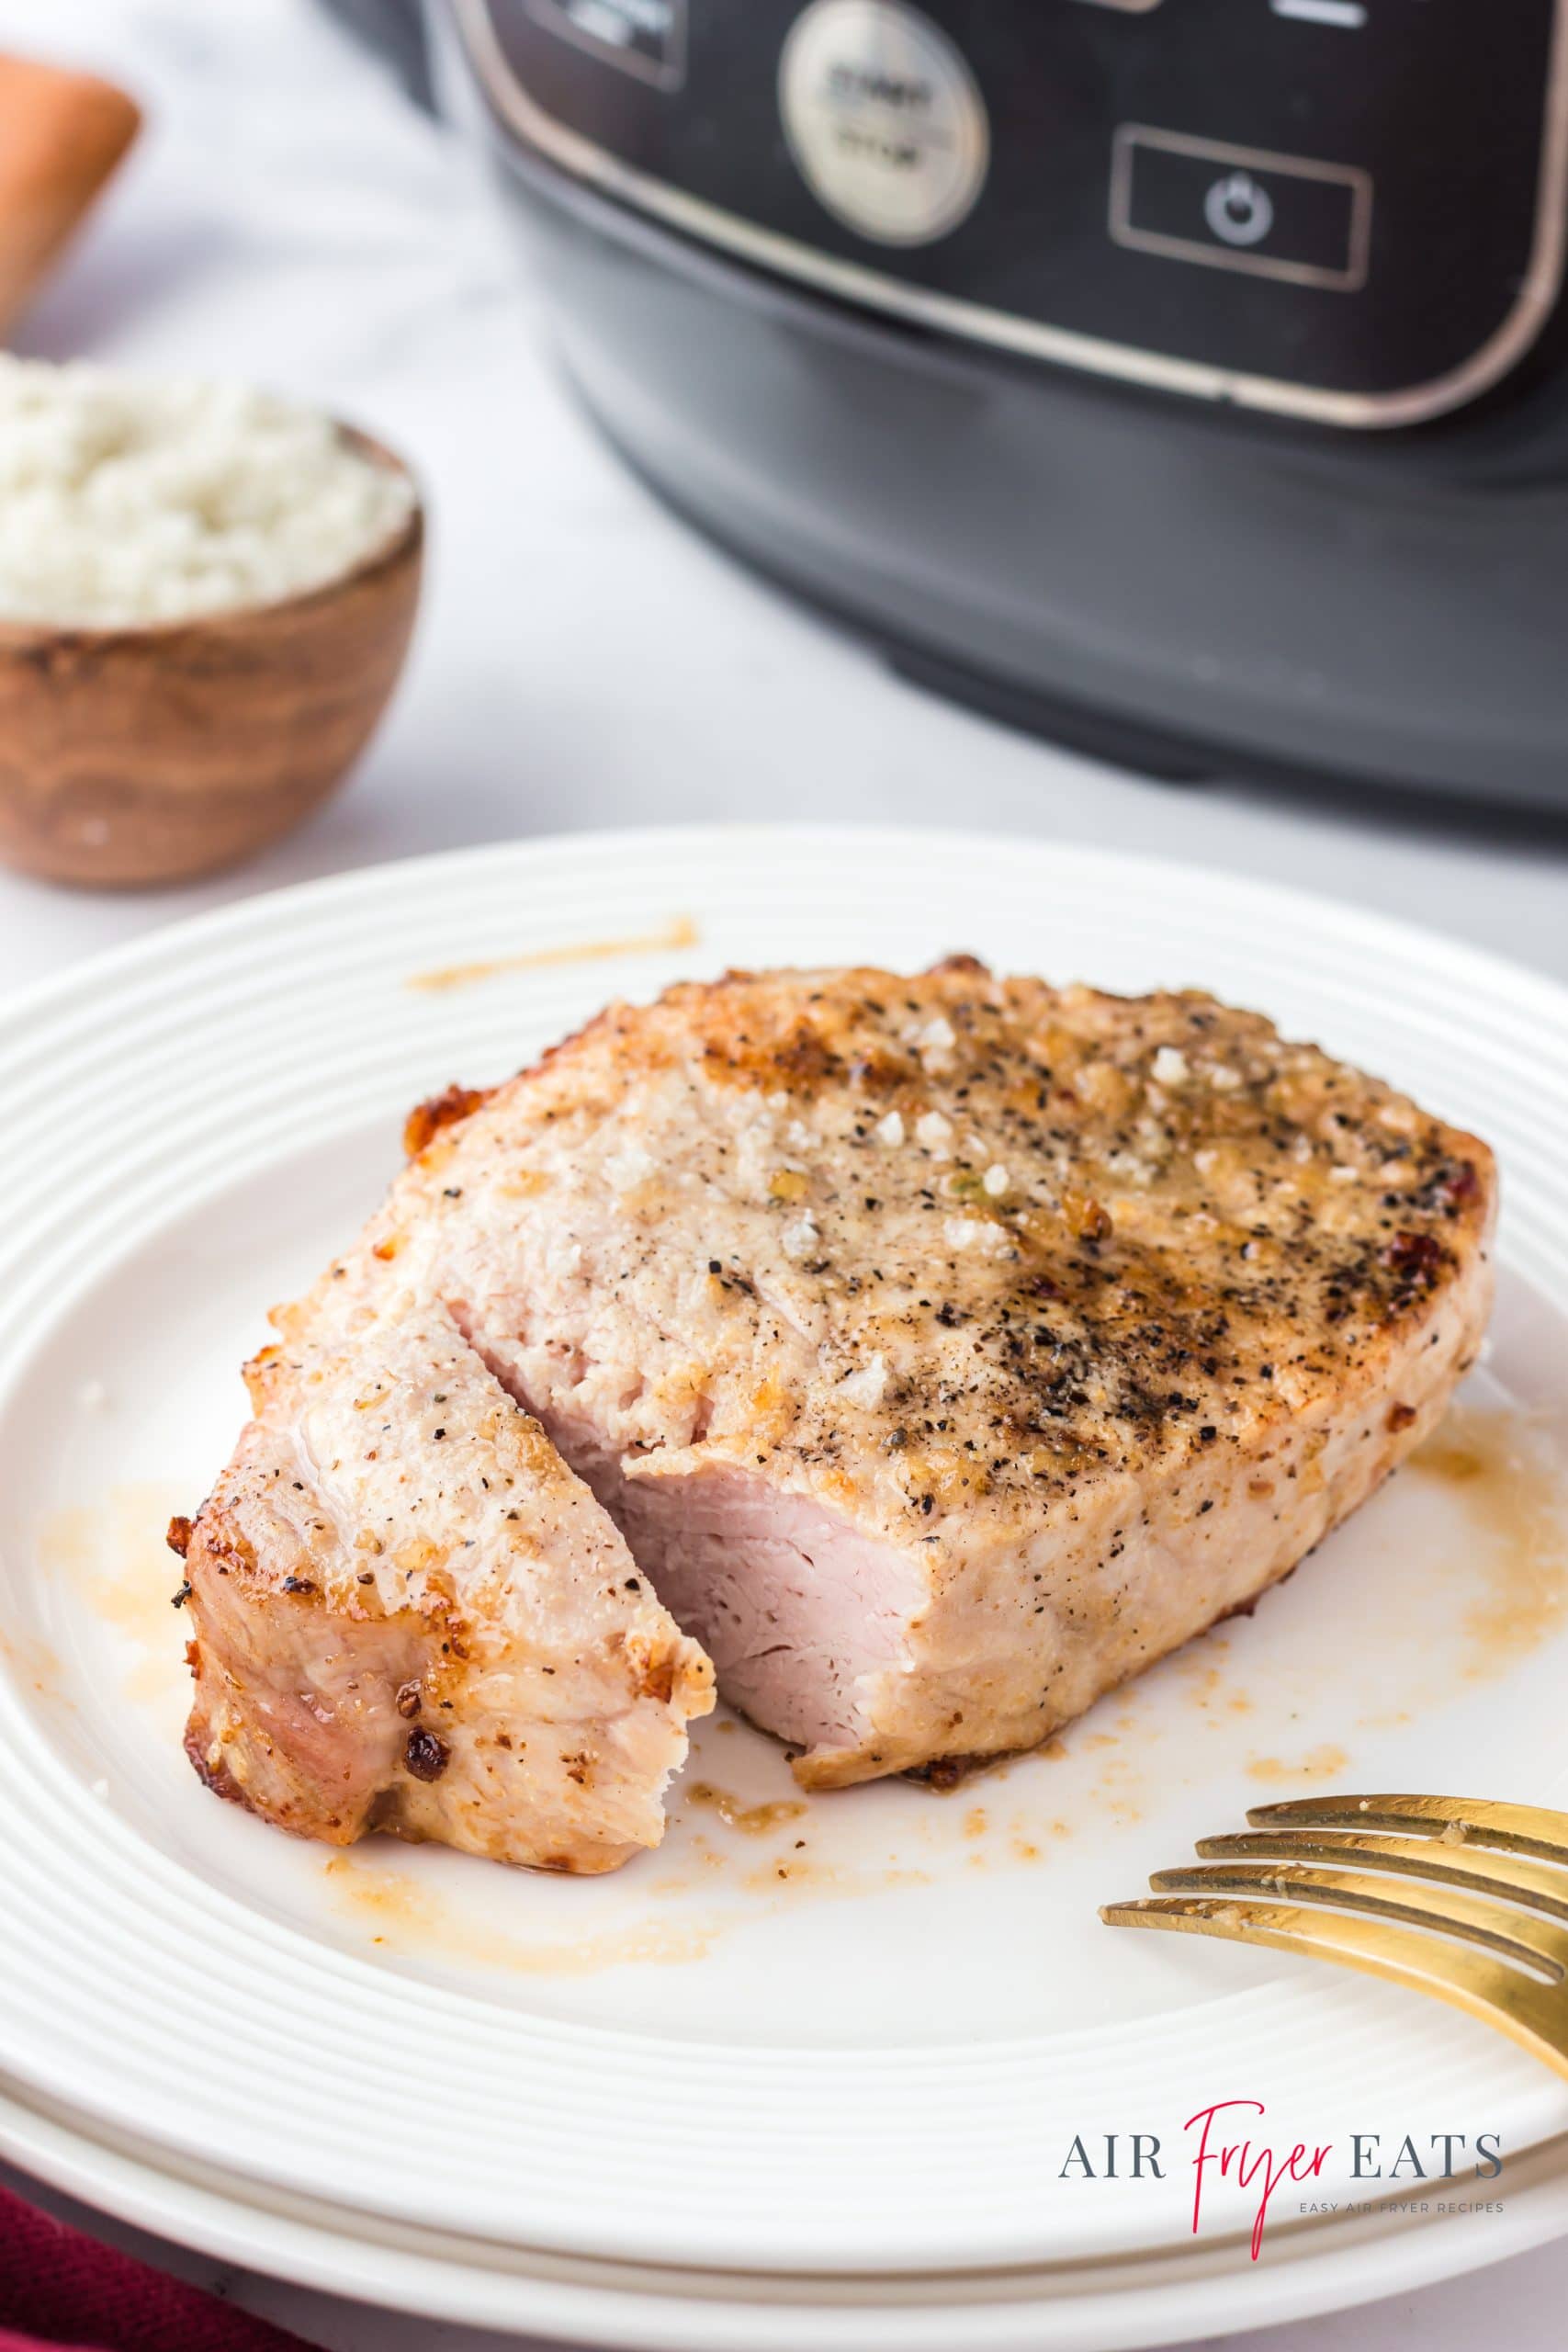 A thick boneless pork chop on a white plate in front of a ninja foodi. A gold fork is balanced on the edge of the plate, and the chop has been cut into to show the juicy texture. 